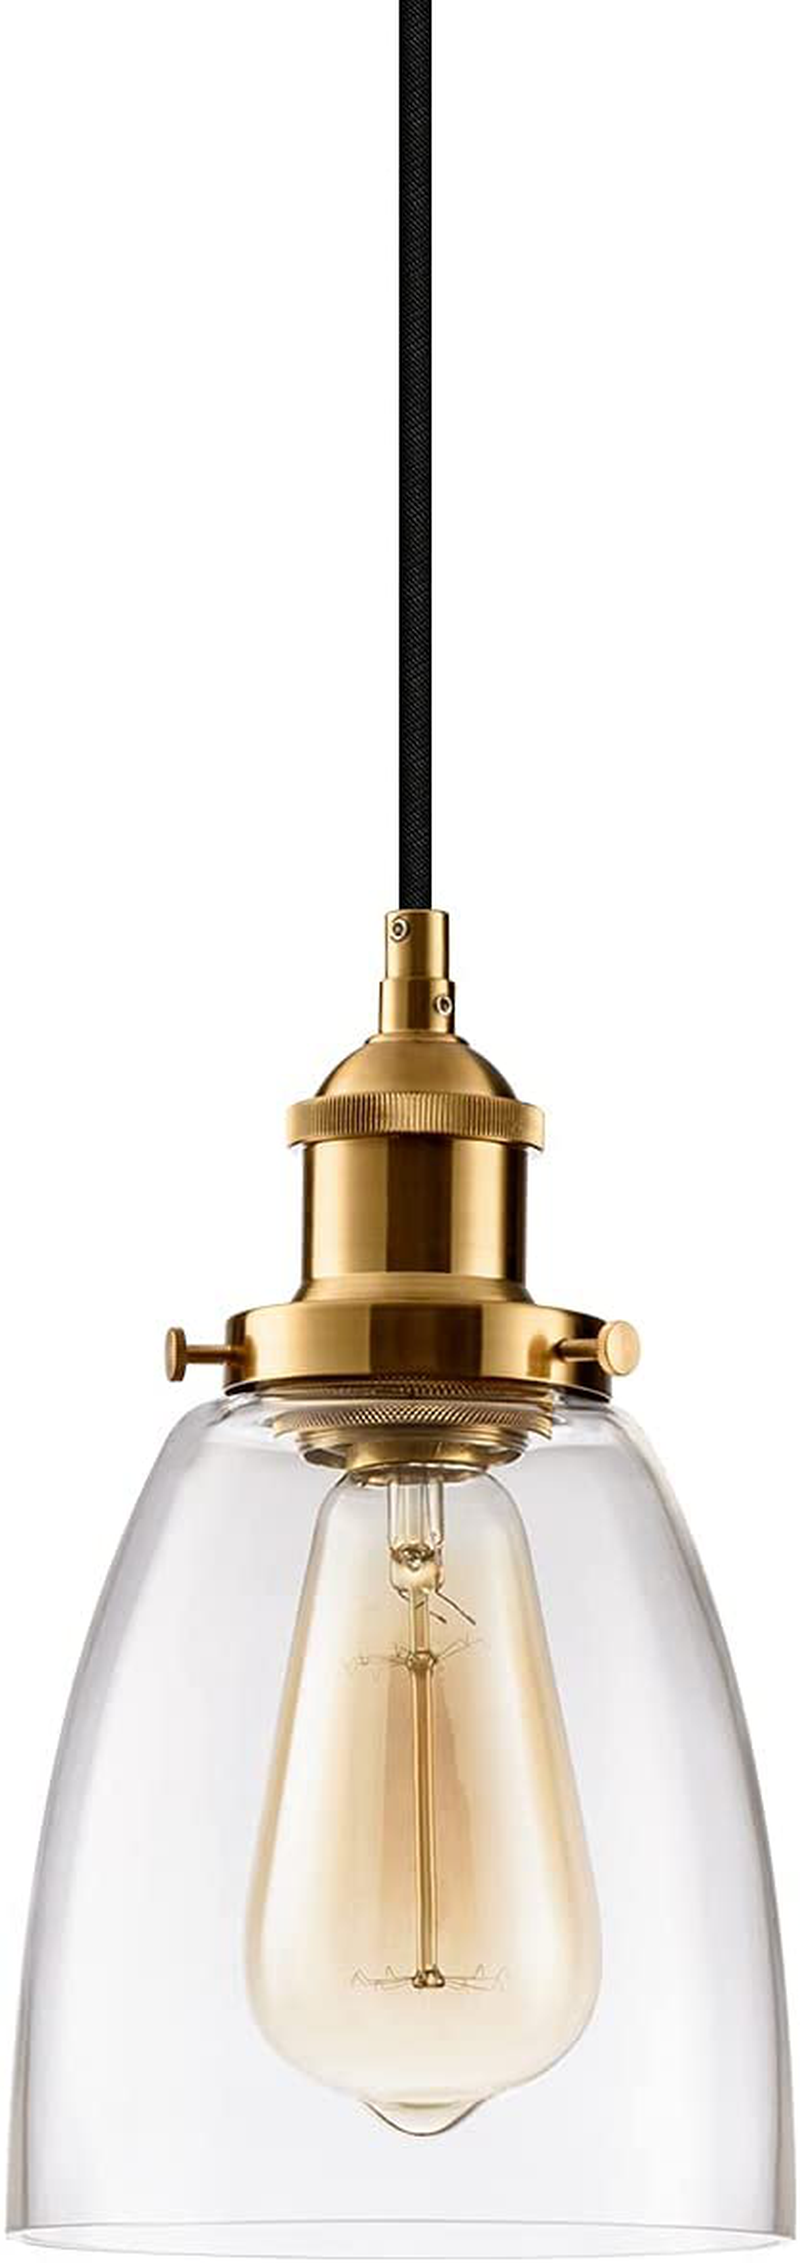 Kitchen Mini-Pendant Light Industrial Edison Hanging Light Island Clear Glass Adjustable Nylon Core Ceramic Holder Lighting Fixture Indoor for Dining Room Entryway Loft (Bulb Not Included) (Clear)